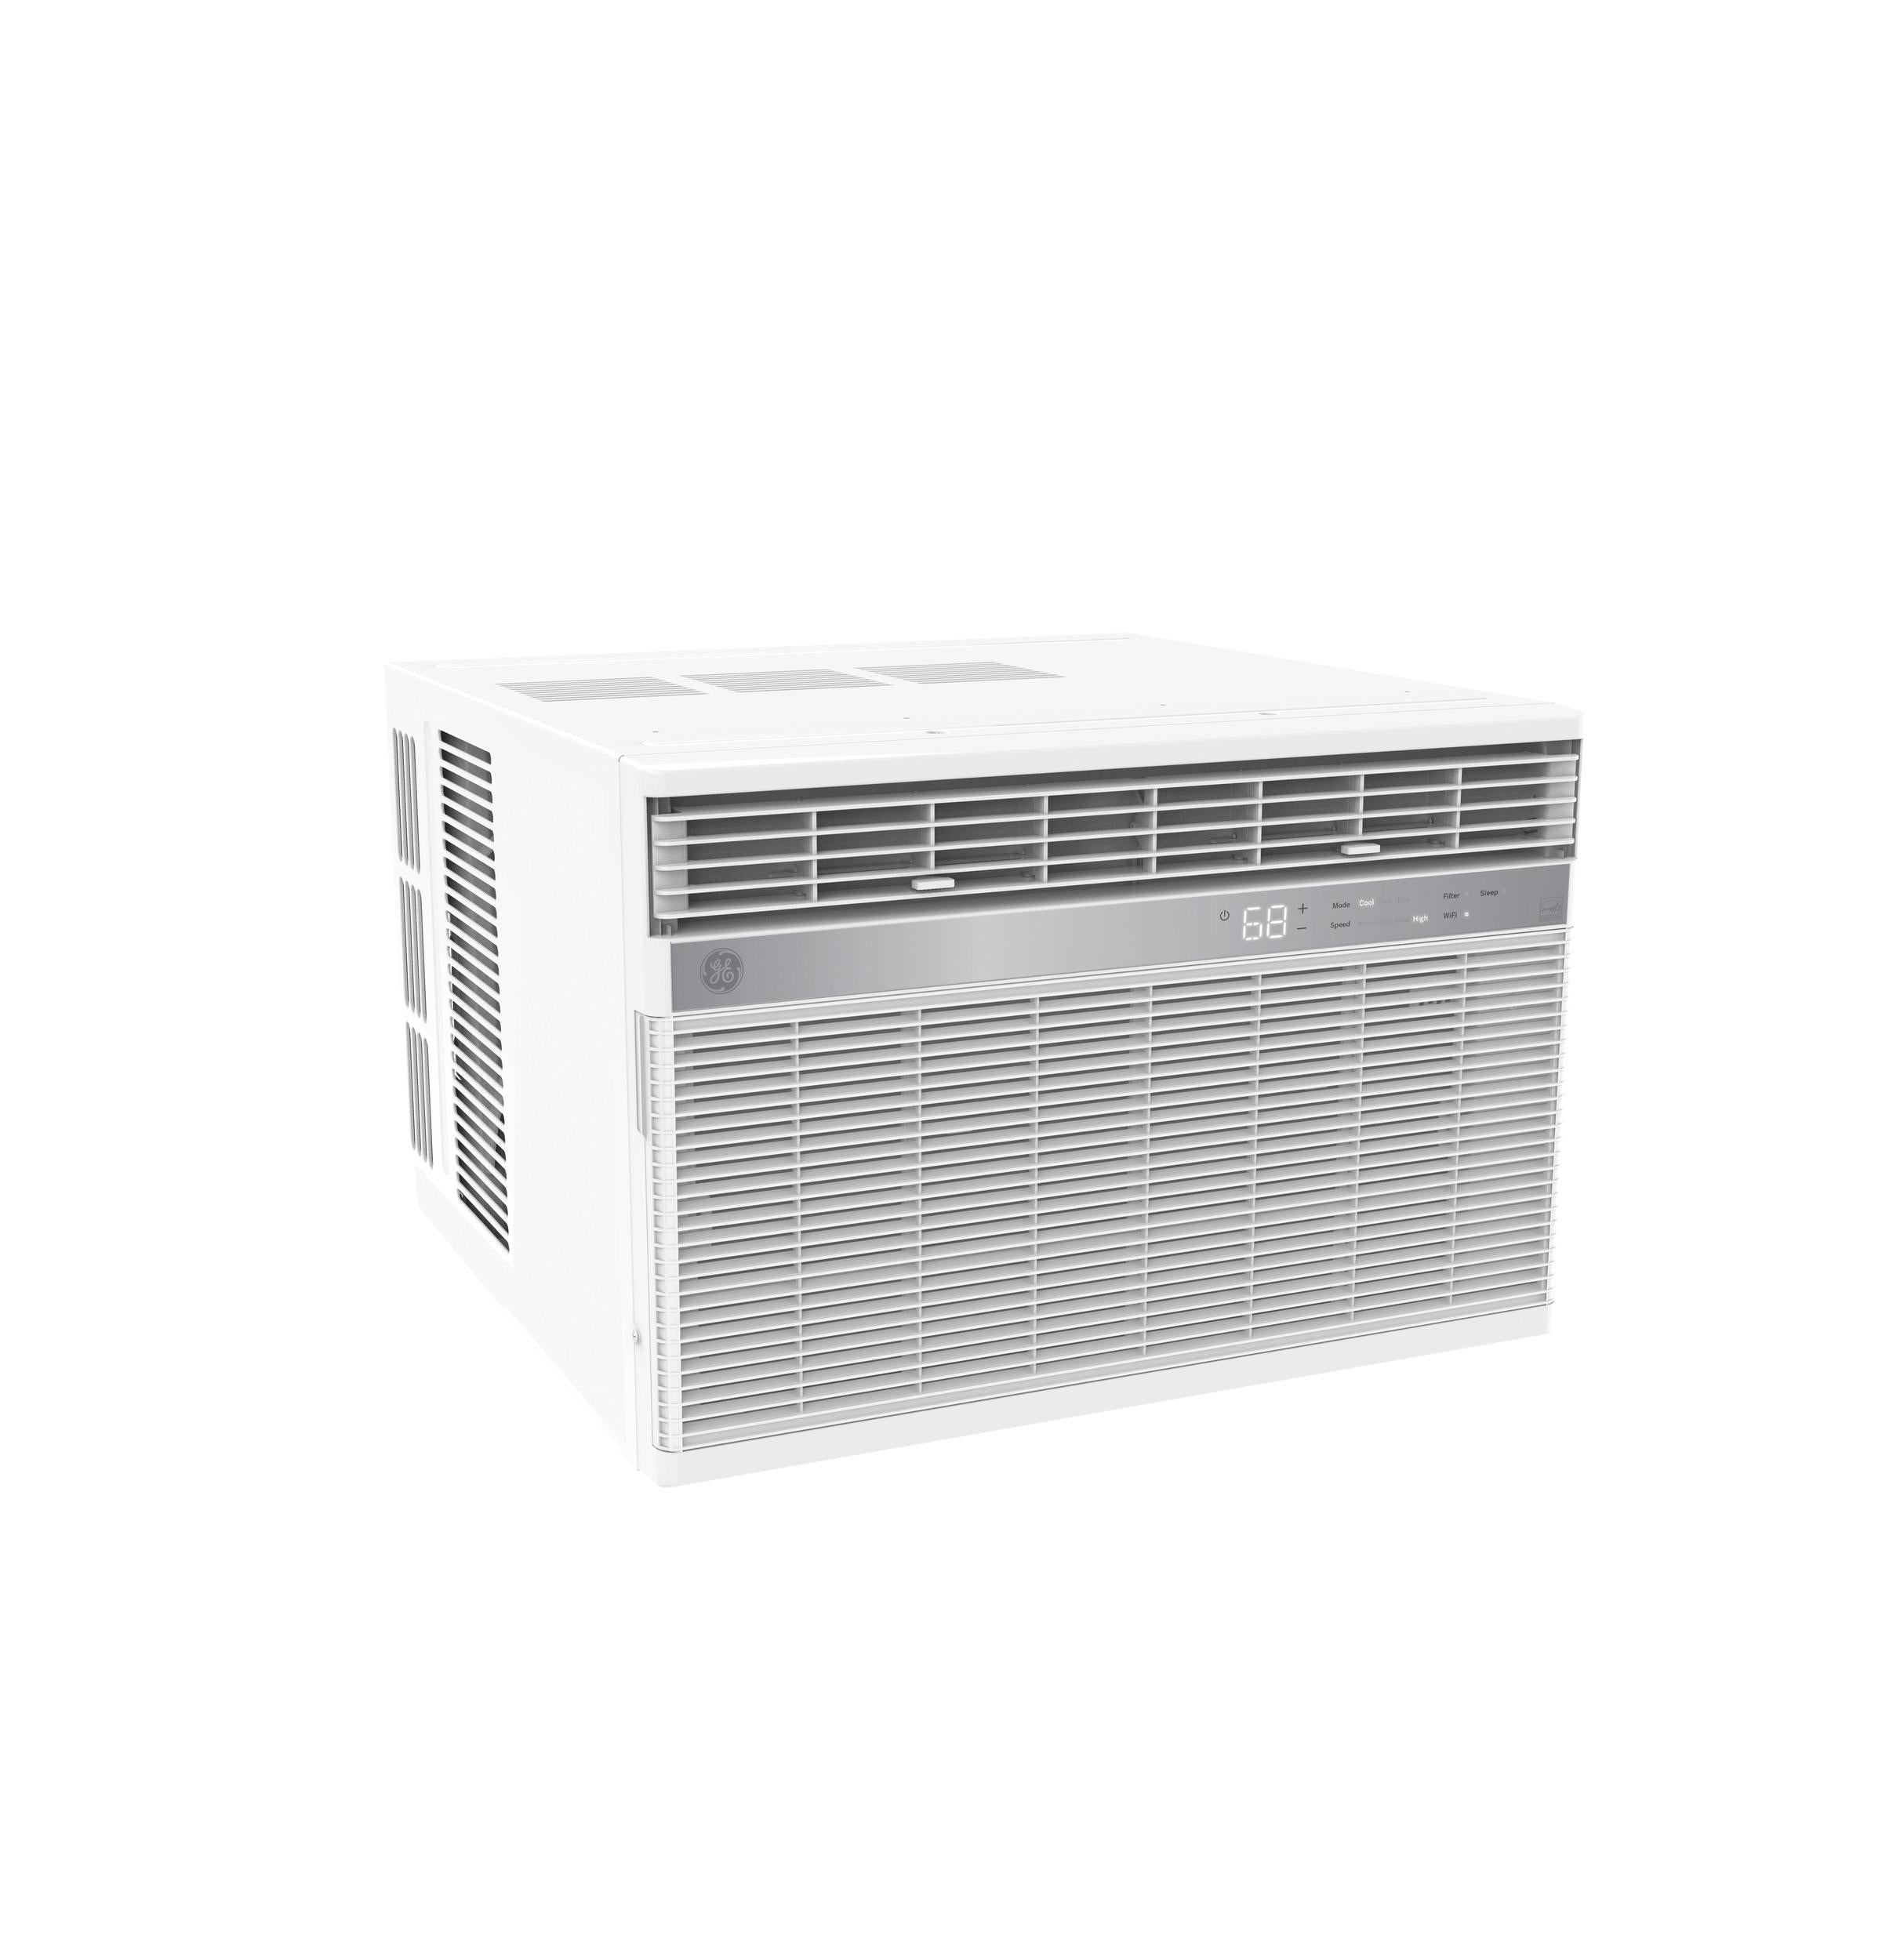 GE® 18,600 BTU Smart Electronic Window Air Conditioner for Extra-Large Rooms up to 1000 sq. ft.